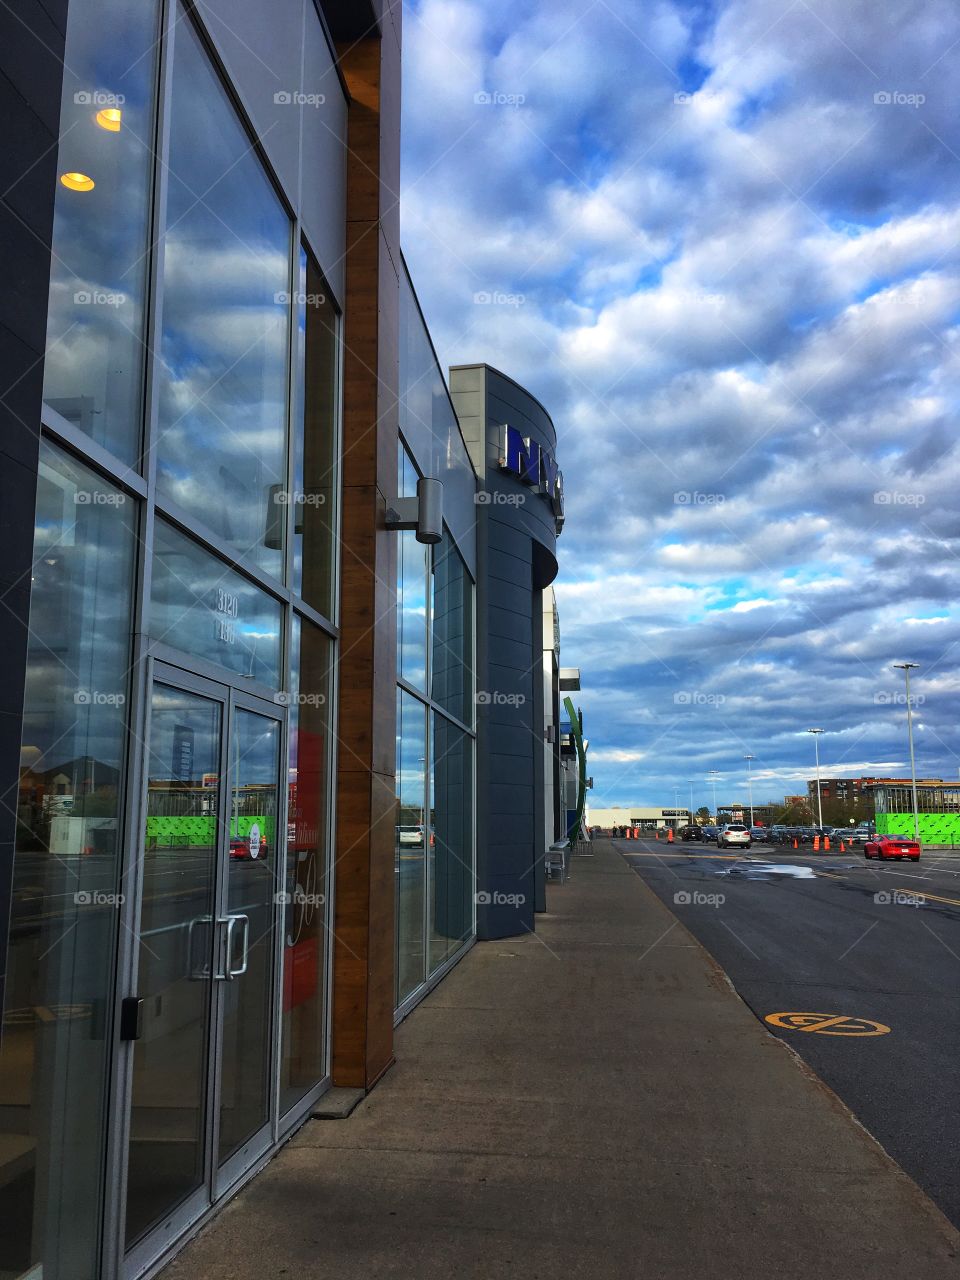 Strip mall and cloudy skies 